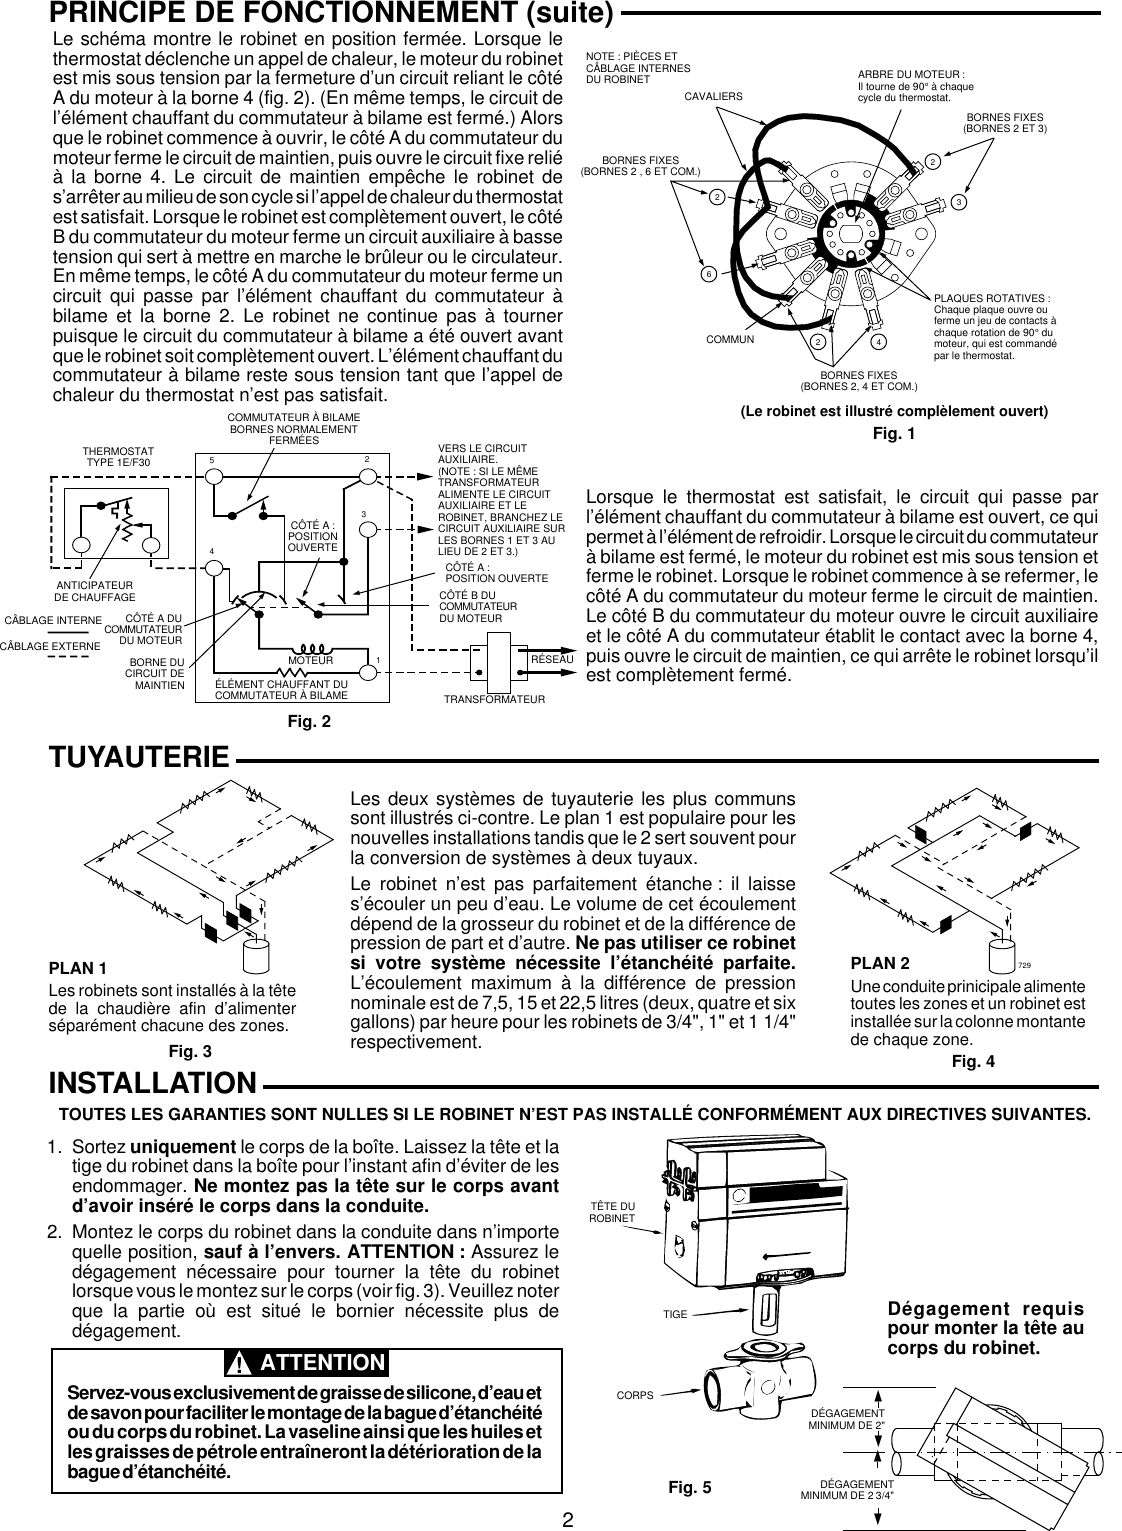 Page 6 of 8 - White-Rodgers White-Rodgers-1361-104-Hydronic-Zone-Controls-Installation-Instructions- 37-5422B (1361)  White-rodgers-1361-104-hydronic-zone-controls-installation-instructions